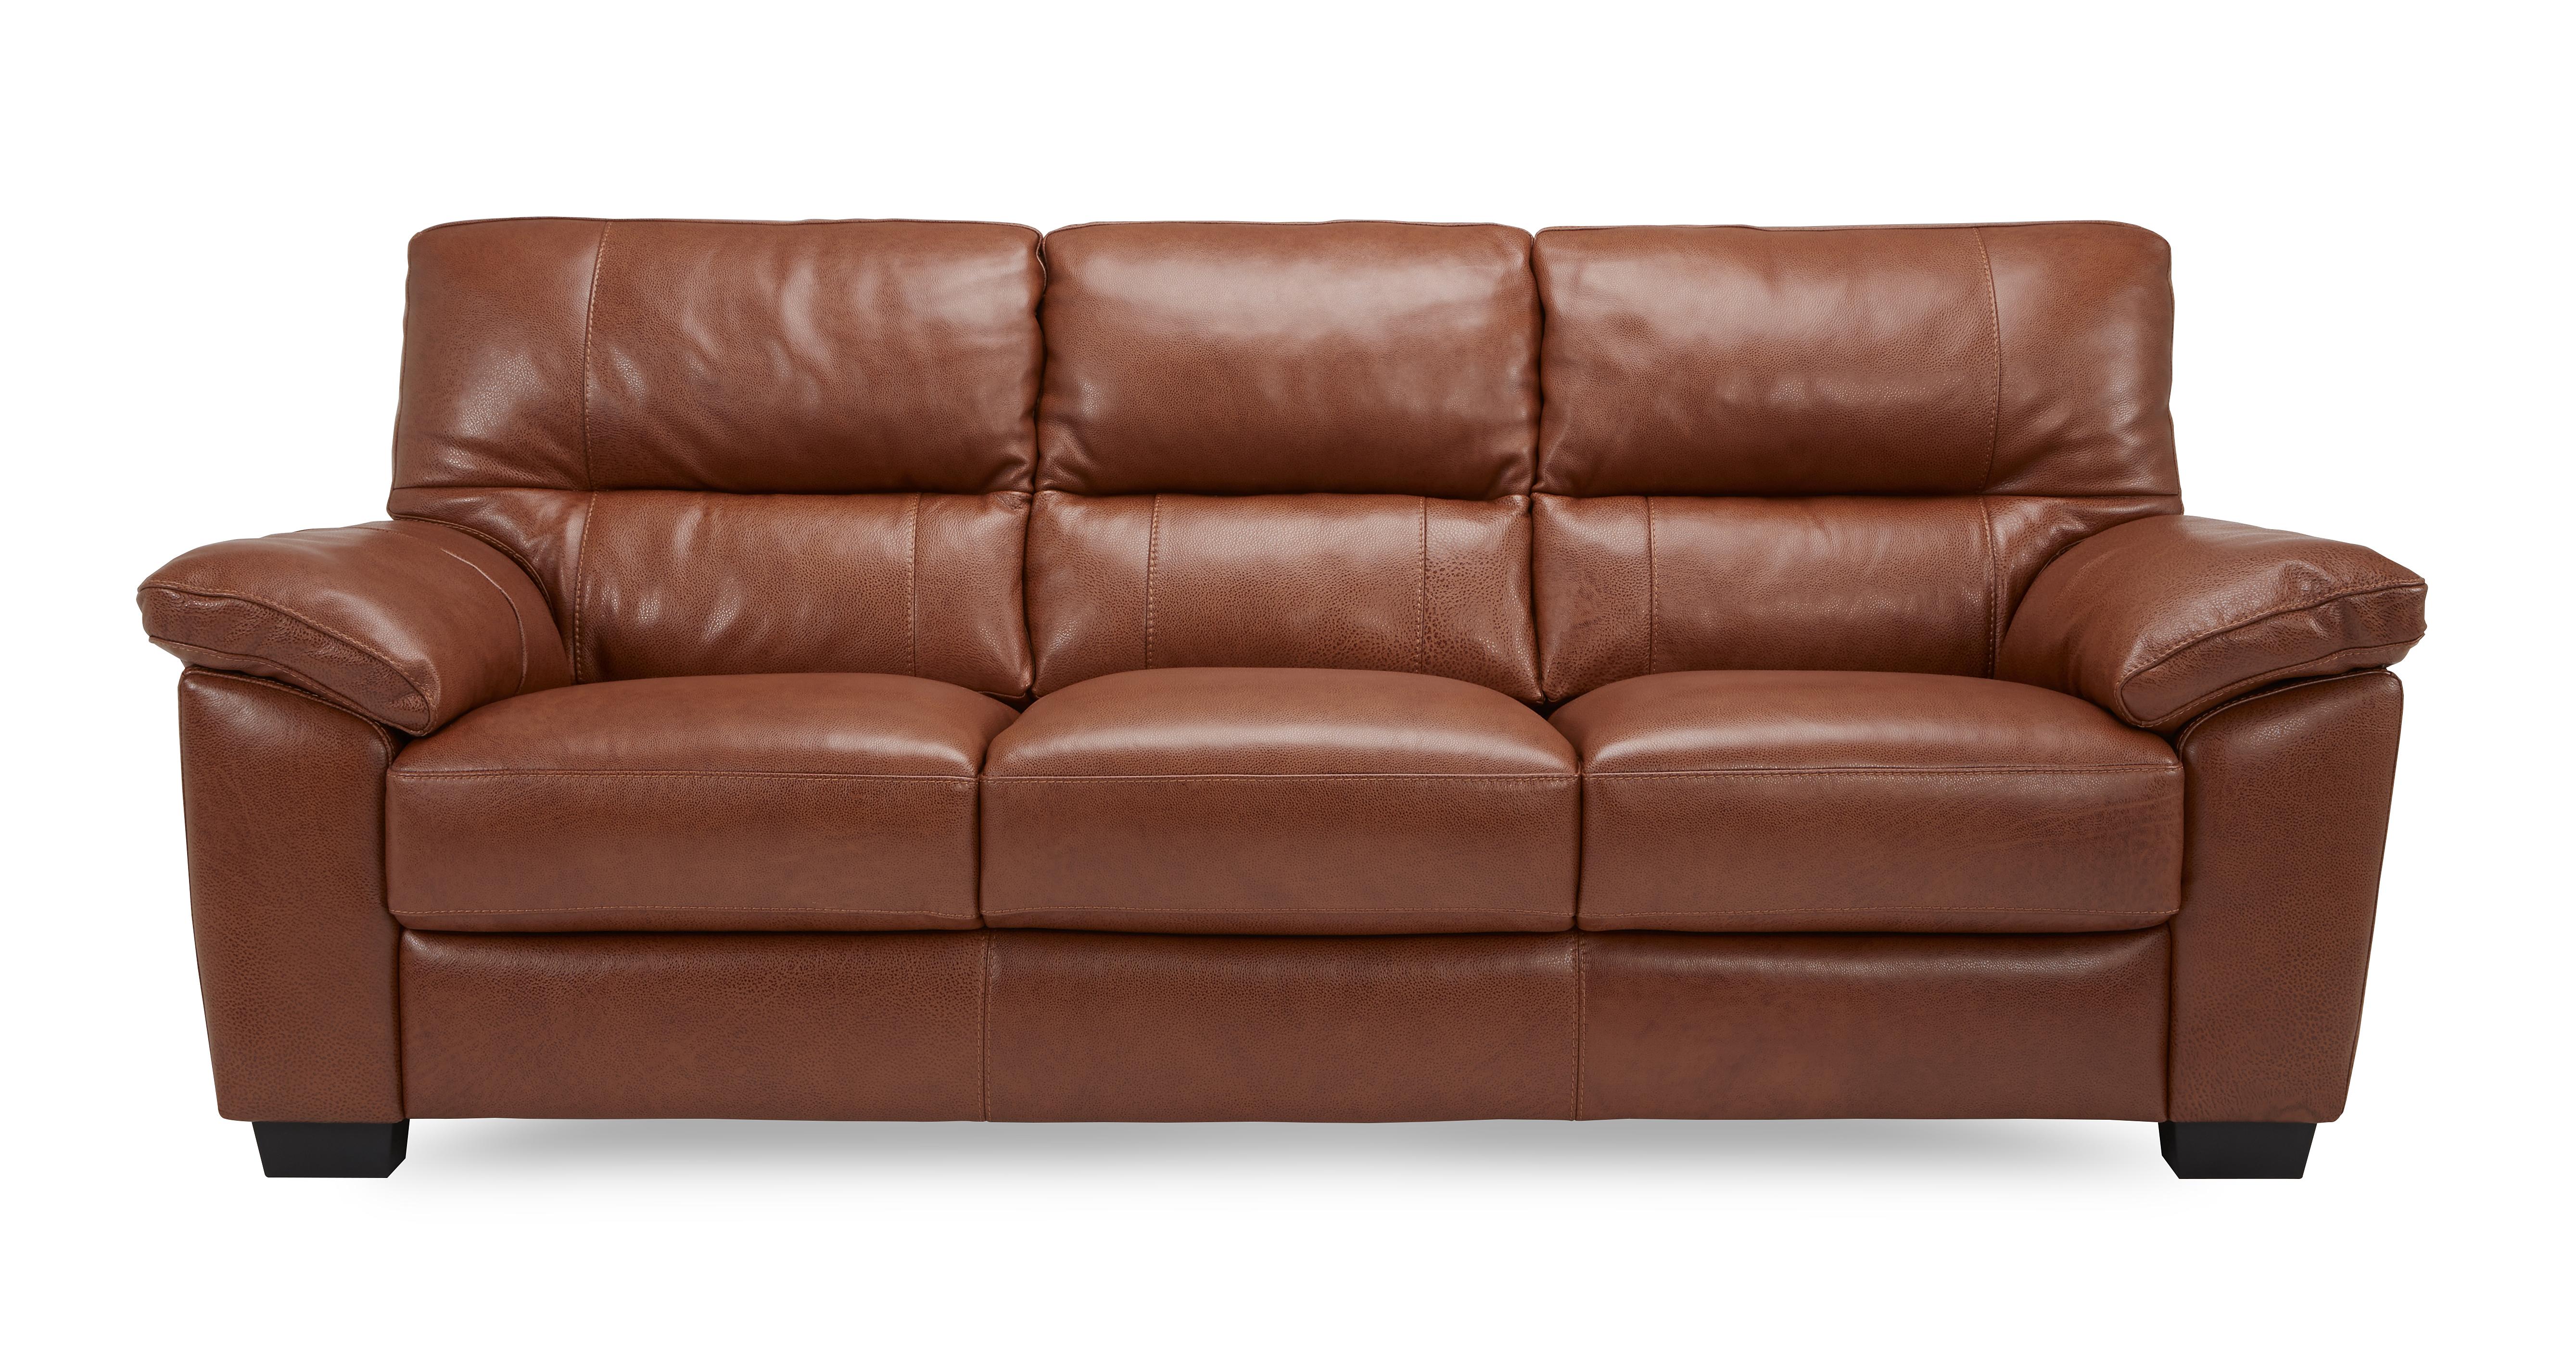 Dalmore Leather And Leather Look 3 Seater Sofa Brazil With Leather